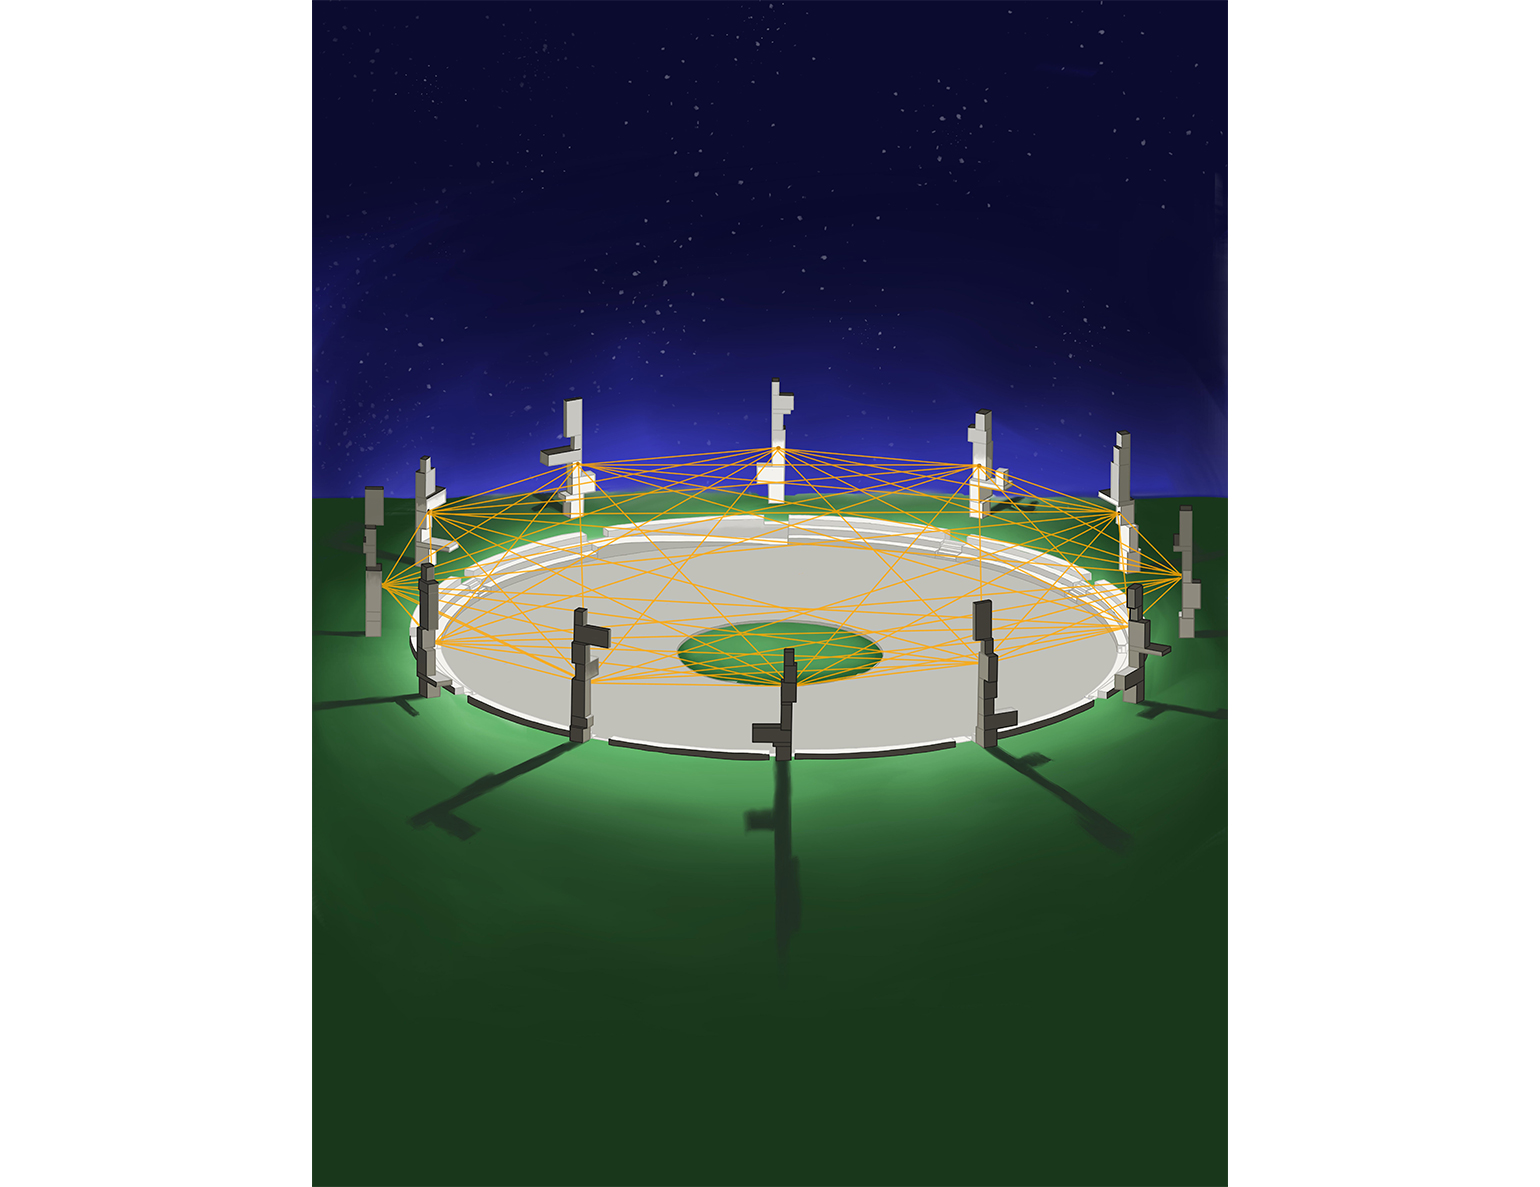 An illustration of a circular outdoor structure with interconnected nets and poles under a starry night sky.